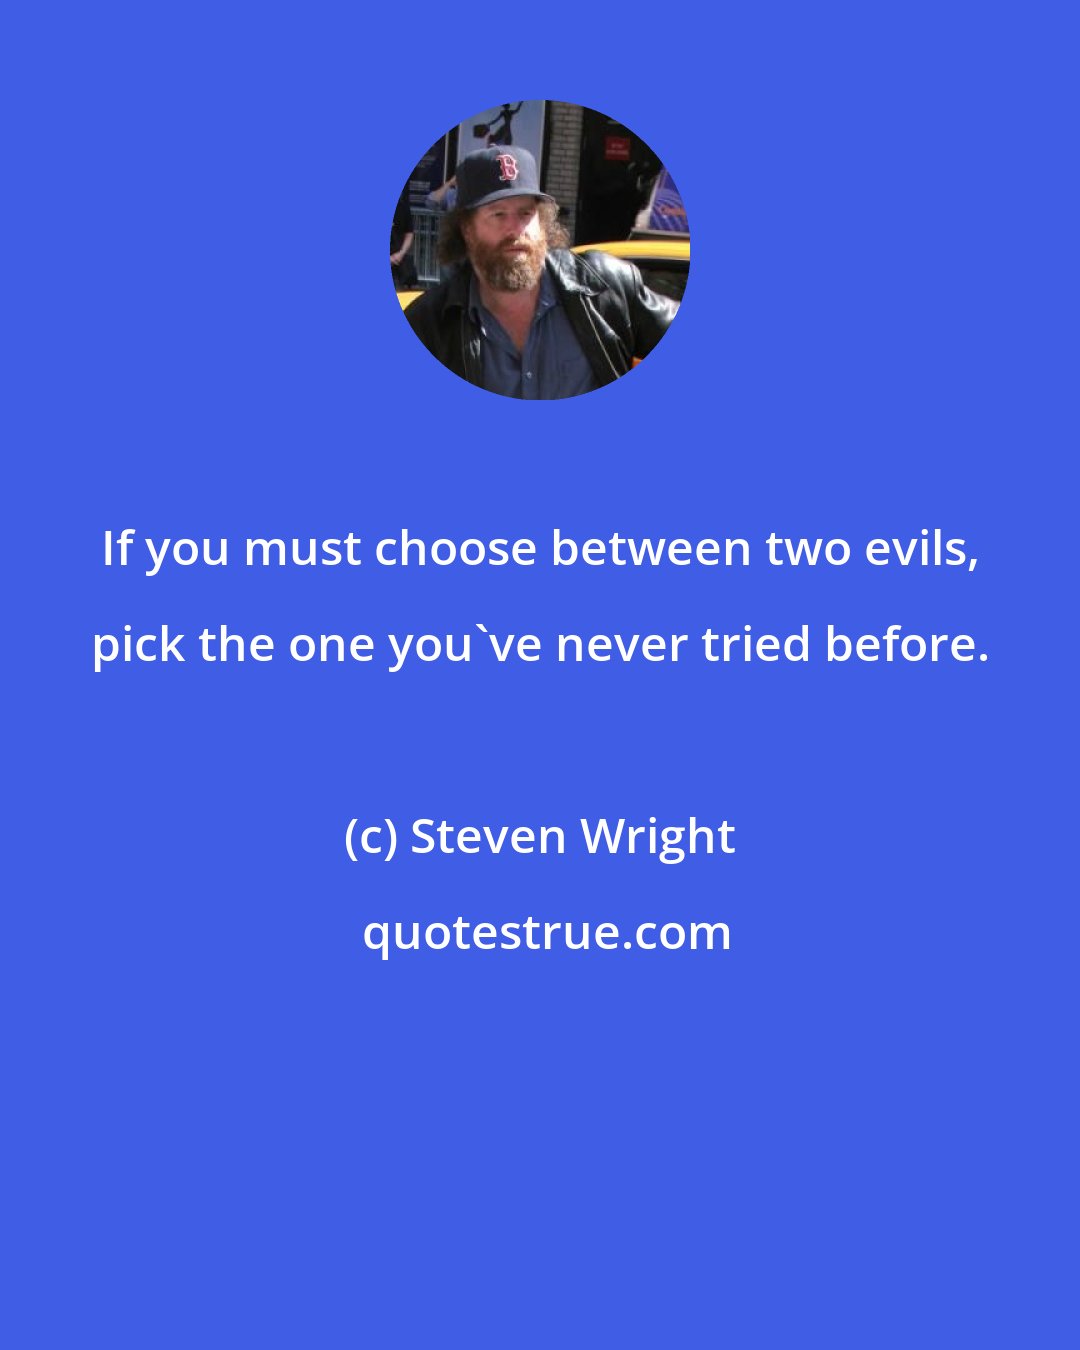 Steven Wright: If you must choose between two evils, pick the one you've never tried before.